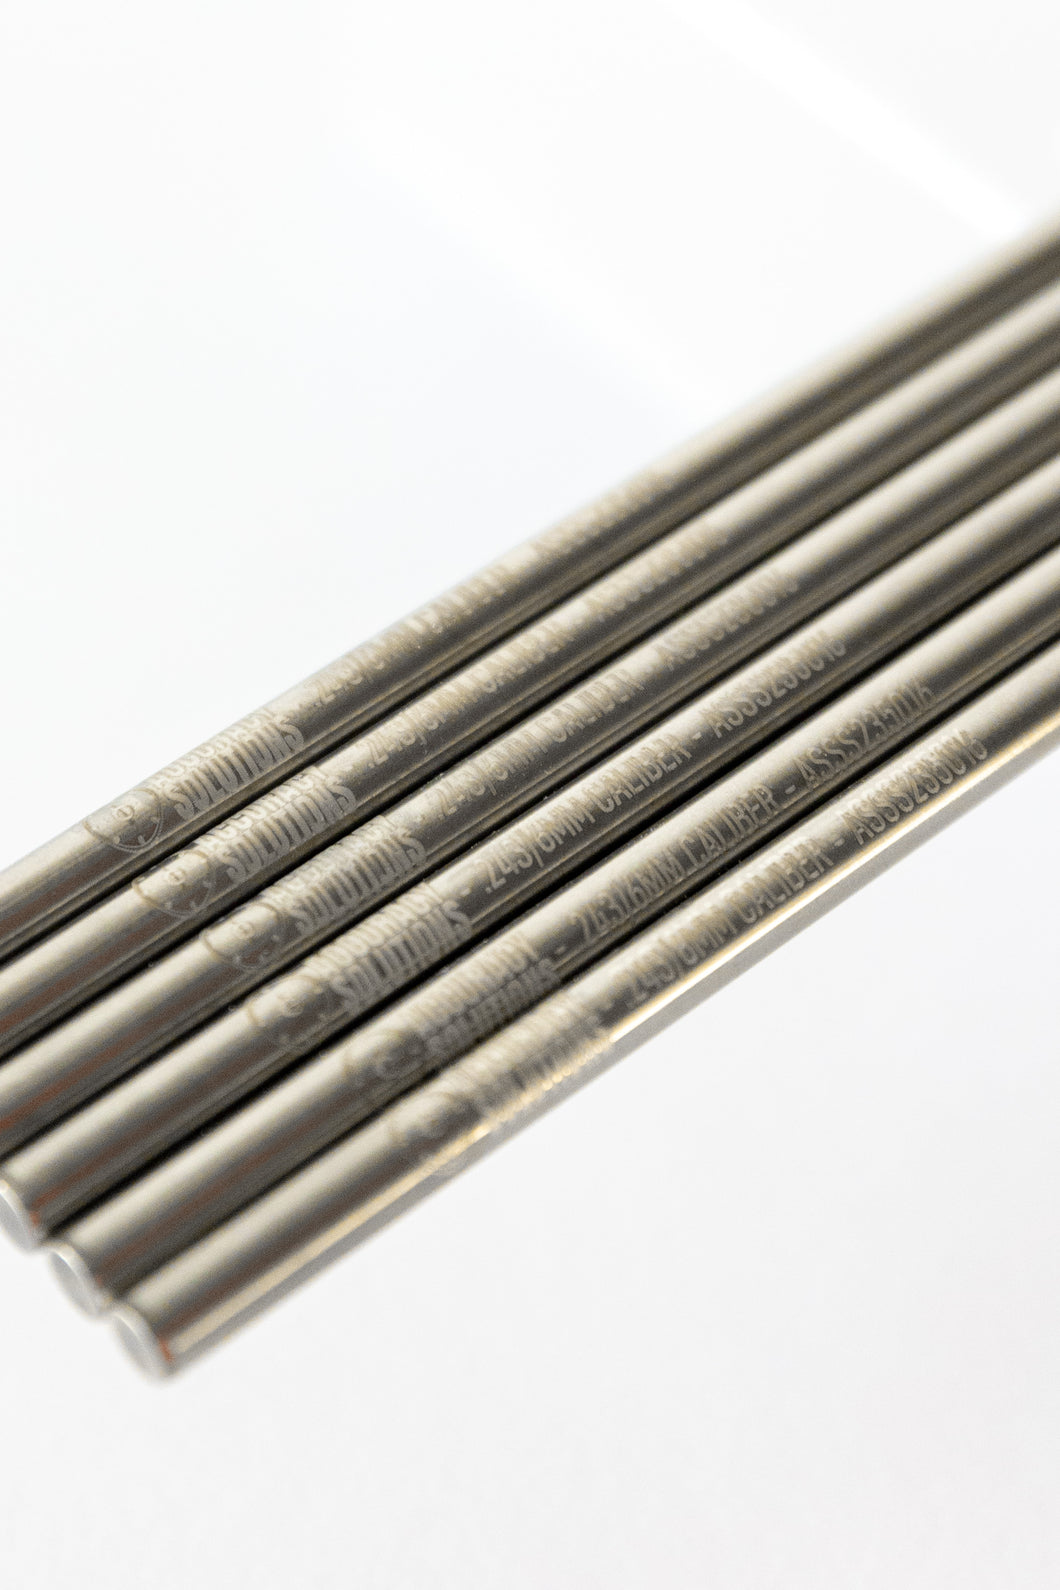 .243/6MM Stainless Steel Bore Alignment Rod